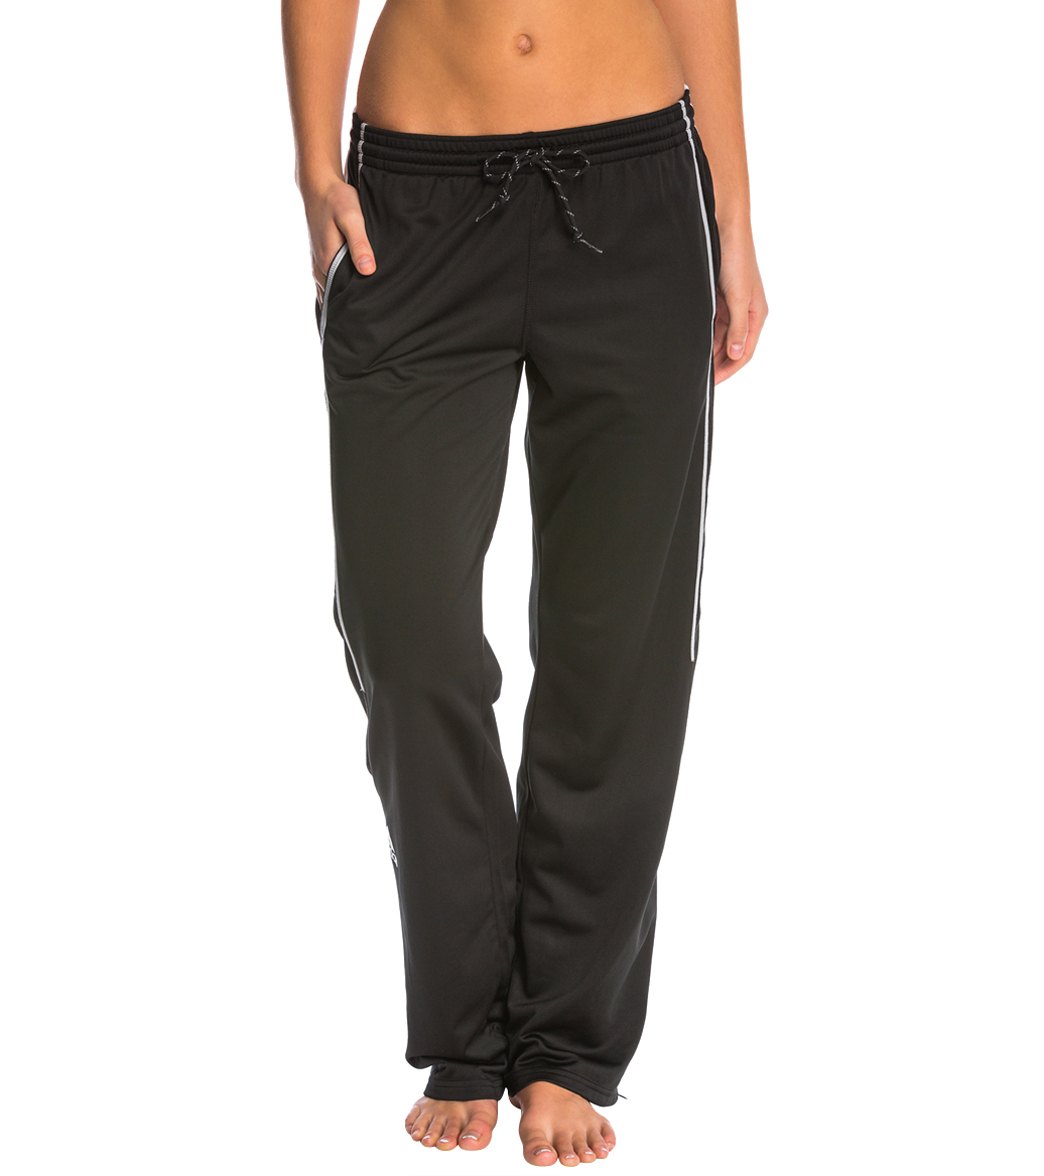 Adidas Women's Utility Warm Up Pants - Black X-Small Polyester - Swimoutlet.com